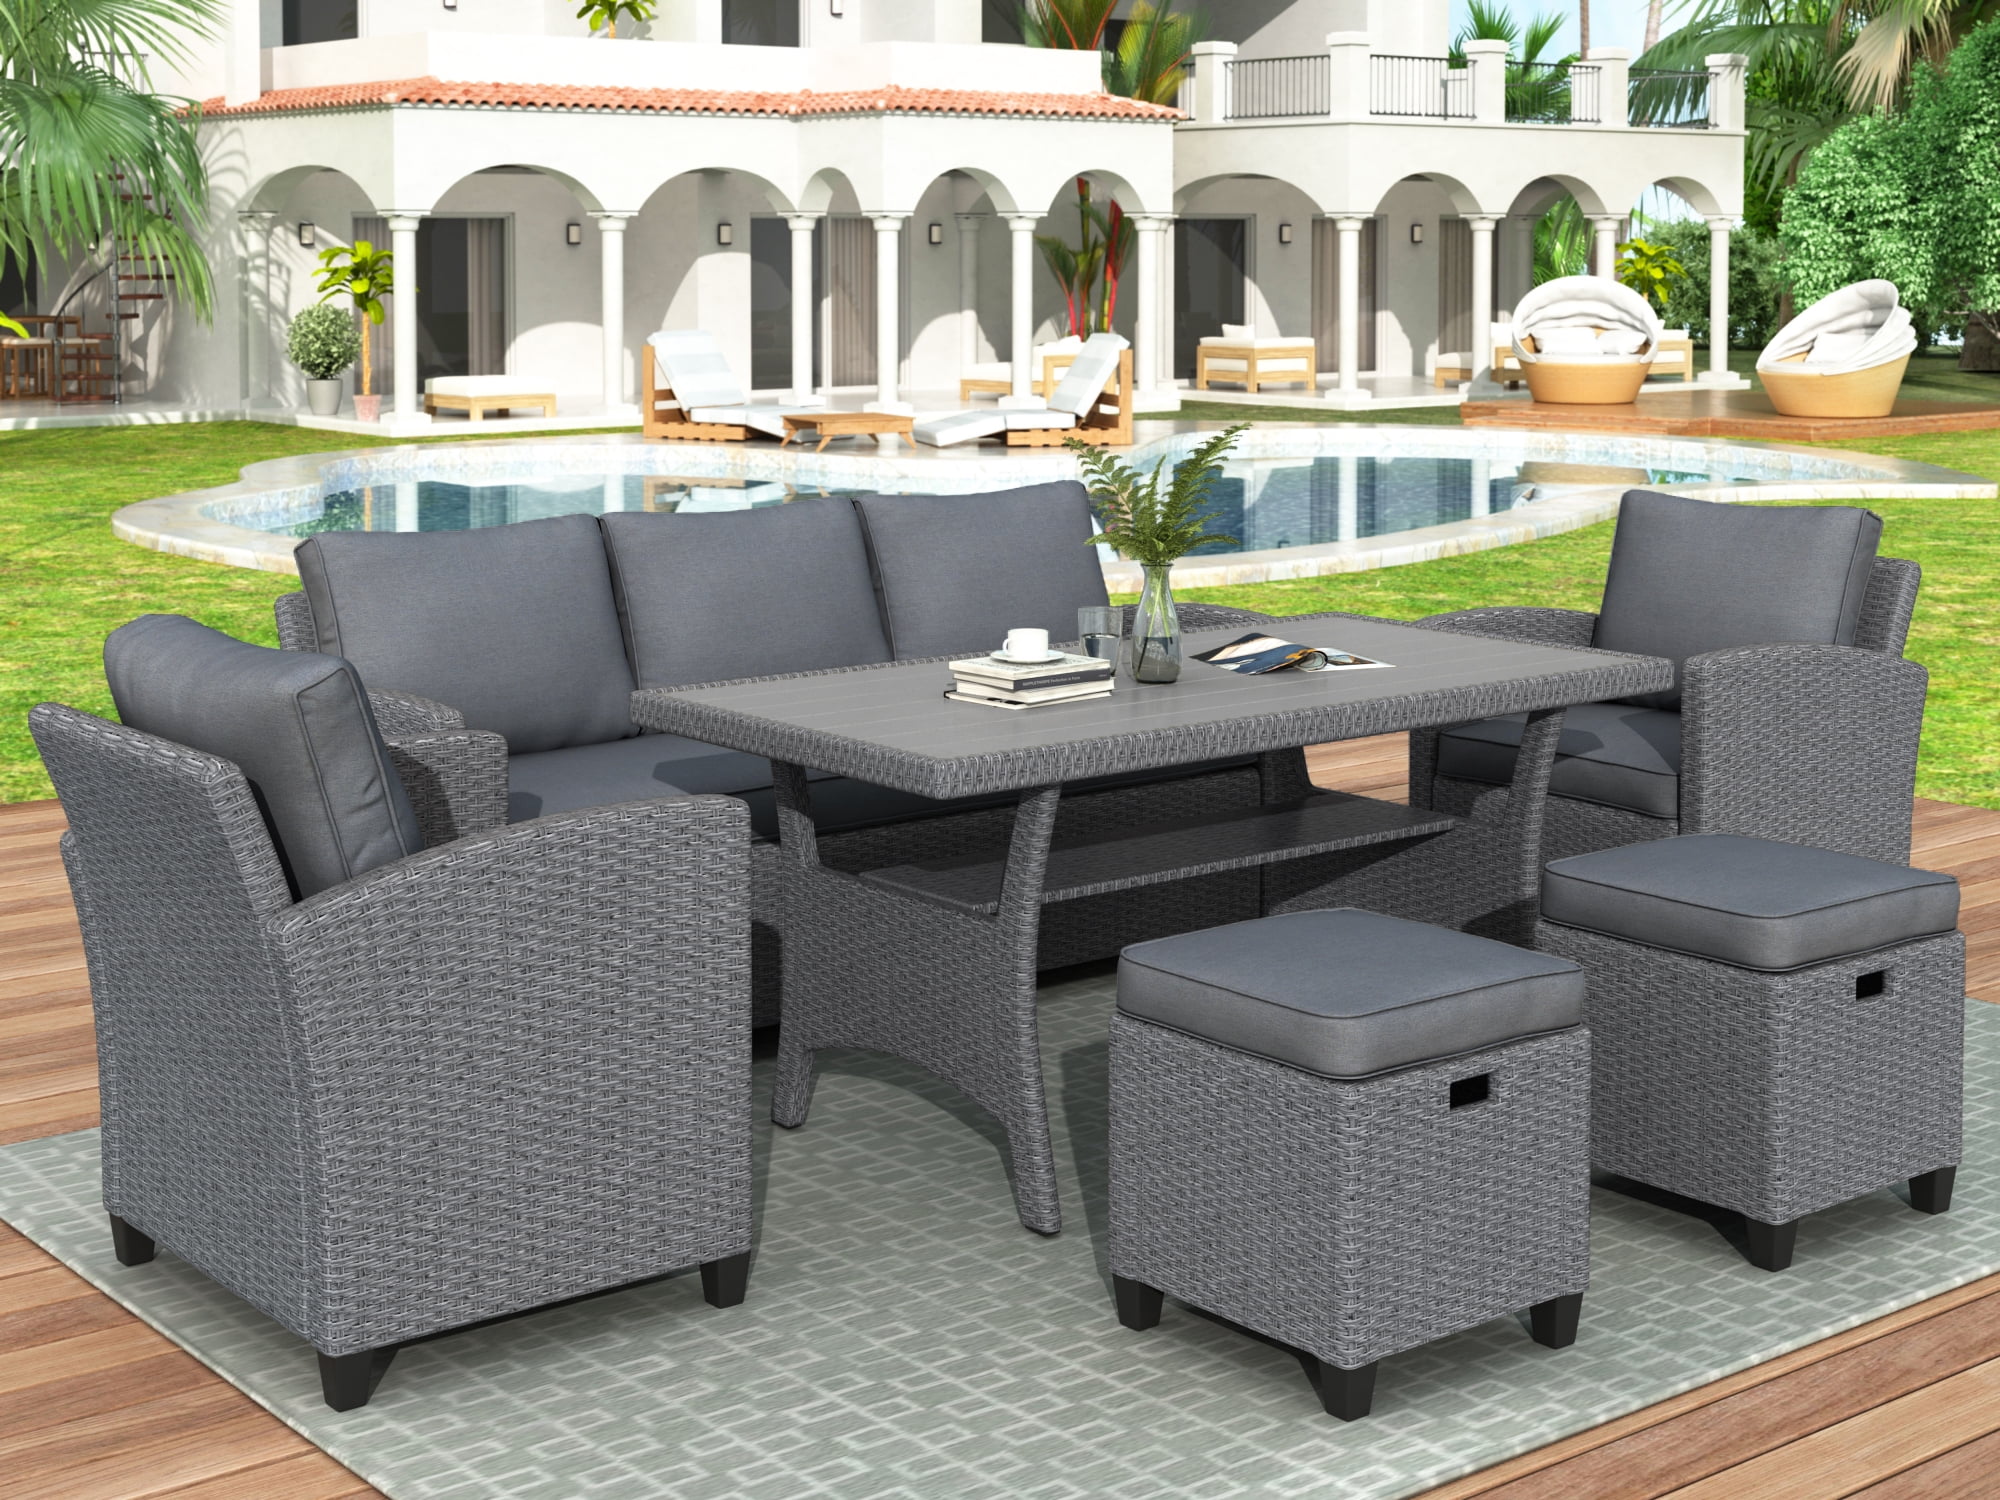 Clearance! Outdoor Sectional Sofa Sets, 6 Piece Patio Wicker Patio Furniture Set, 3-Seater Sofa ...